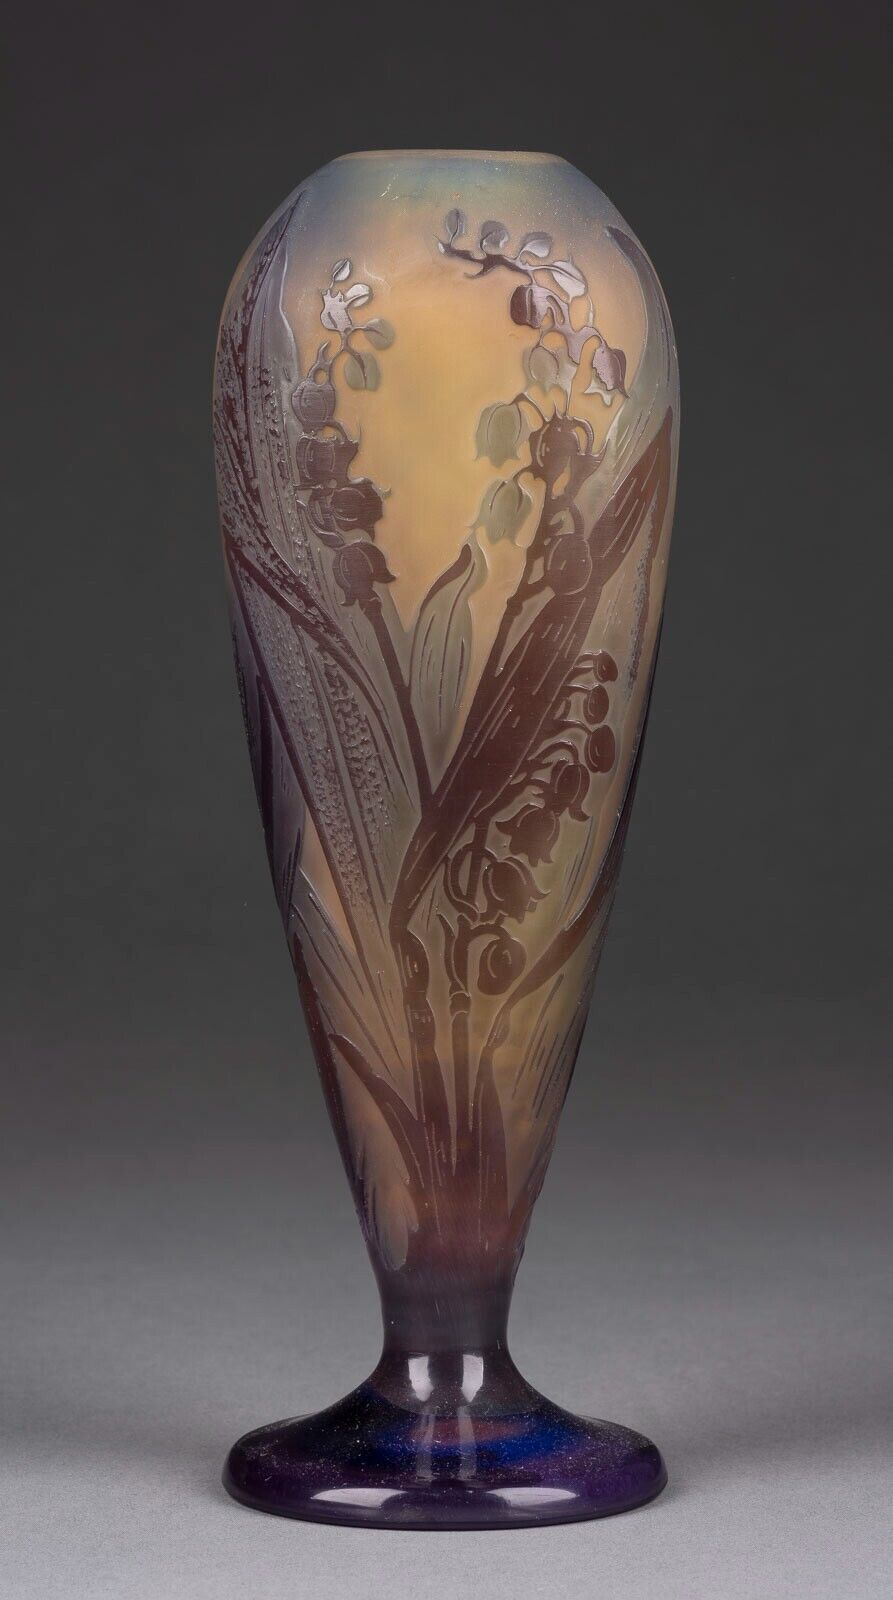 An exquisite ÉMILE GALLÉ Lily of the Valley Vase (1846 - 1904 )